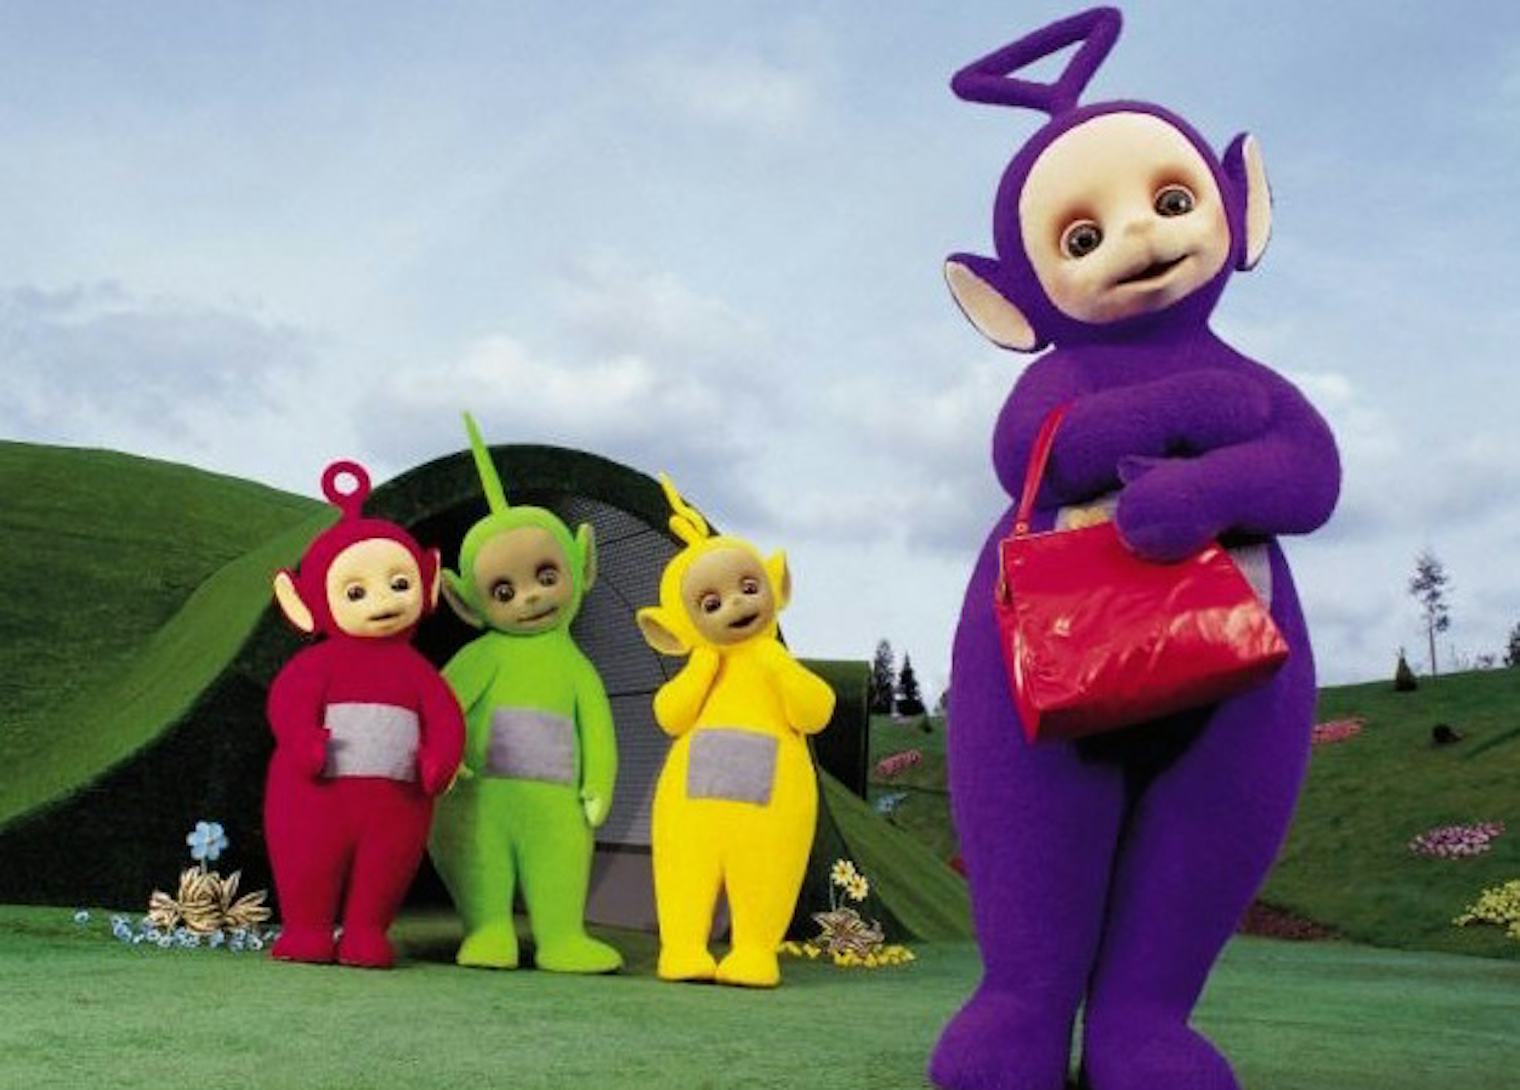 A 'Teletubbies' Reboot Is Happening, So How Can The Show Best Appeal To